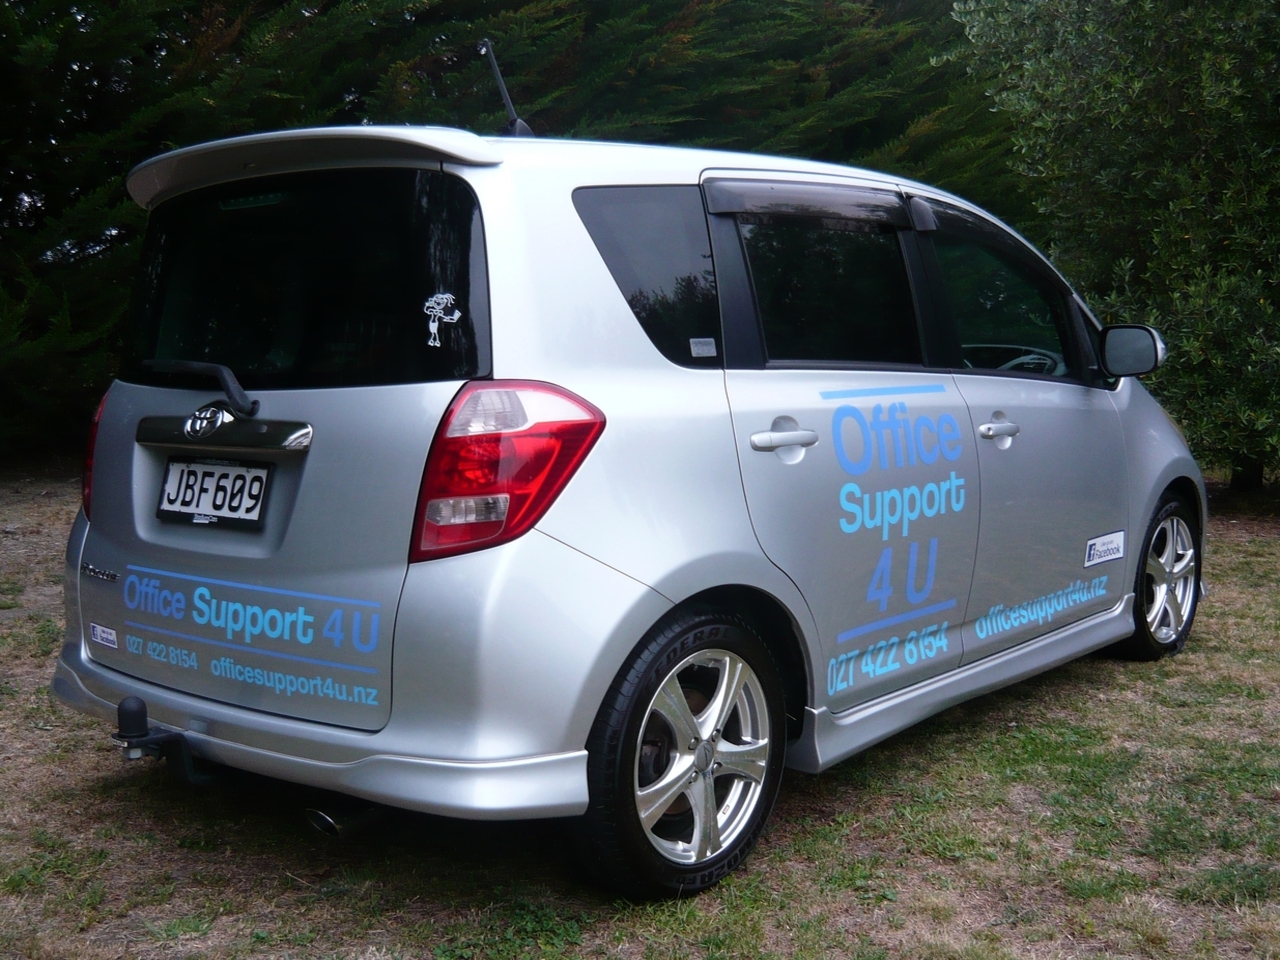 Silver Toyota car branded with Office Support 4 U